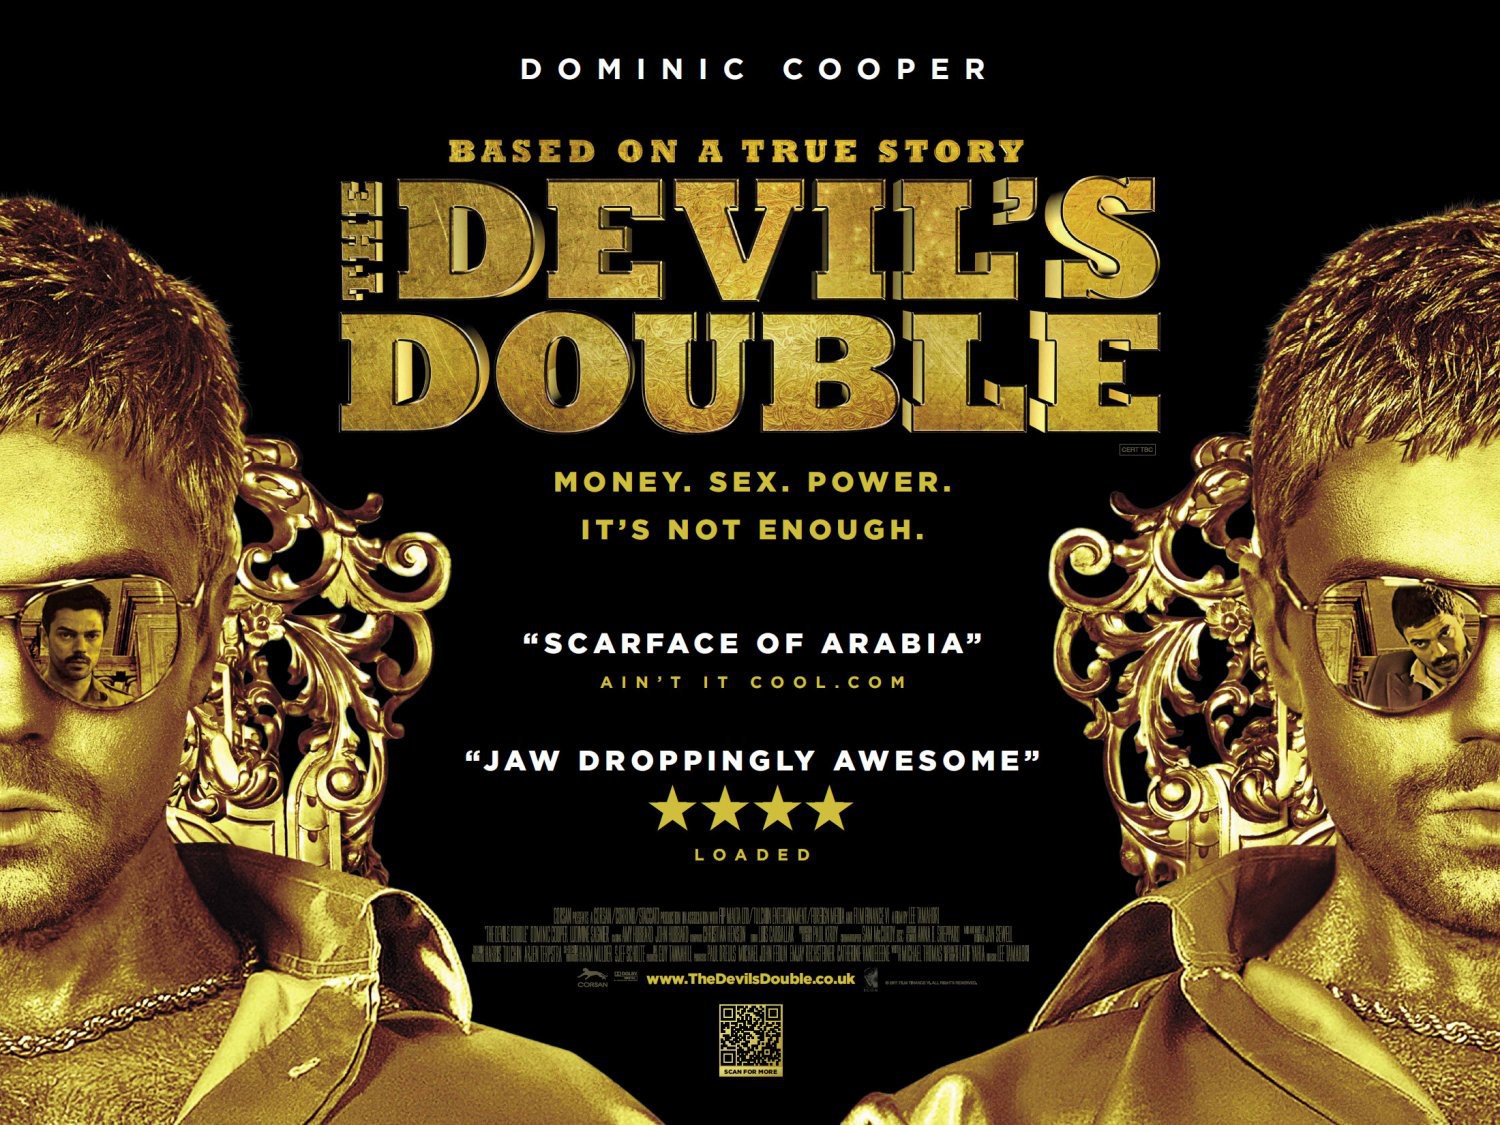 More Reviews The Devils Double The Whistleblower Mystic River And Colombiana Fatpie42